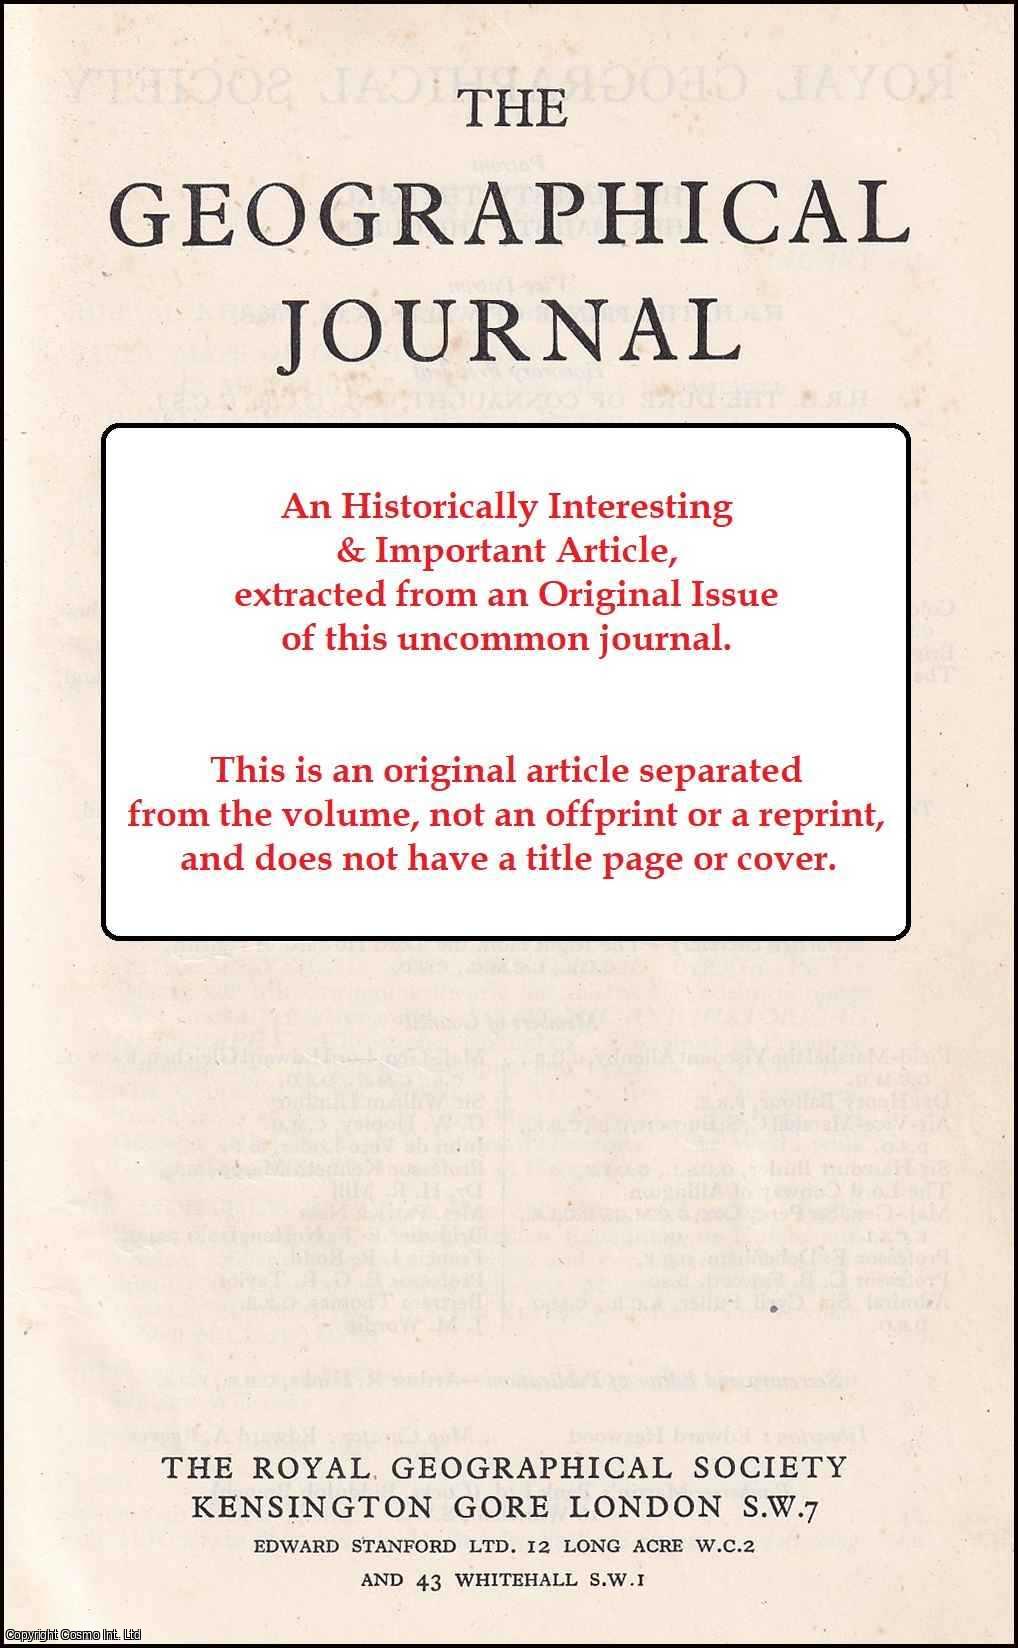 J. C. Doornkamp - Surface, Drainage and Tectonic Instability in Part of Southern Uganda. An original article from the Geographical Journal, 1966.